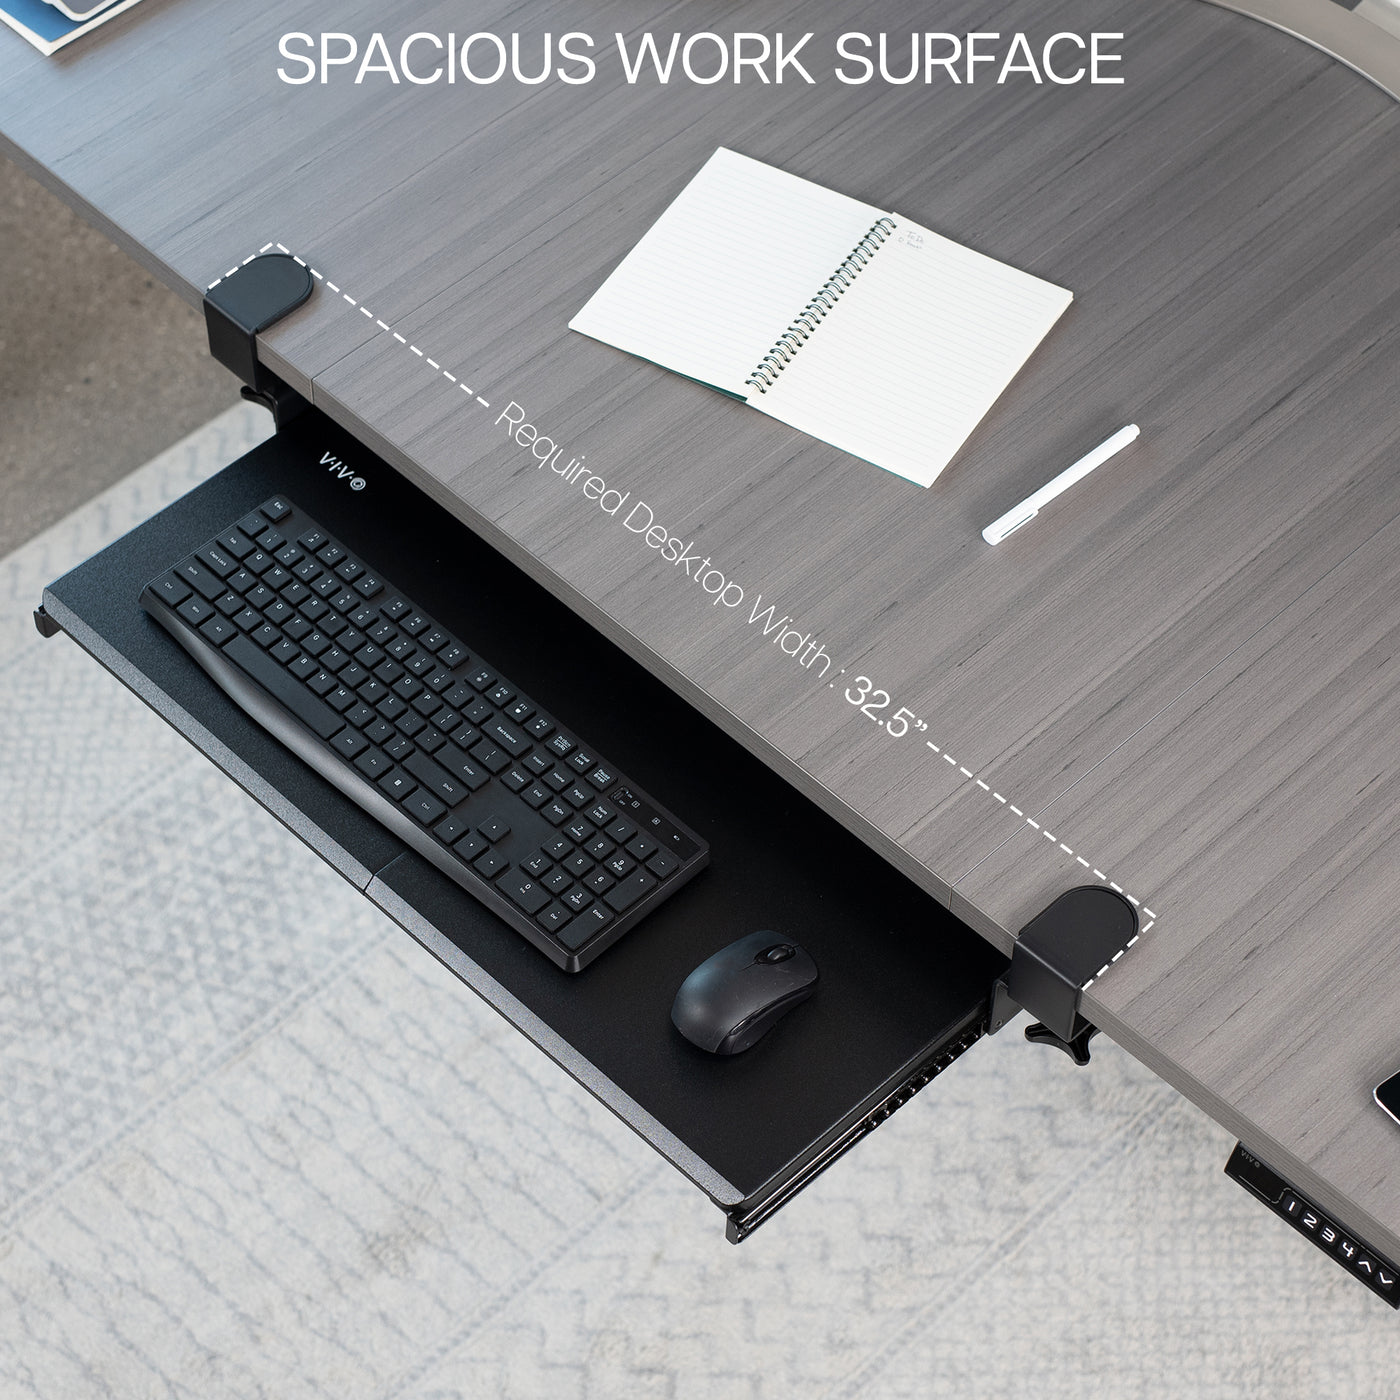 Clamp-on Keyboard Tray – VIVO - desk solutions, screen mounting, and more